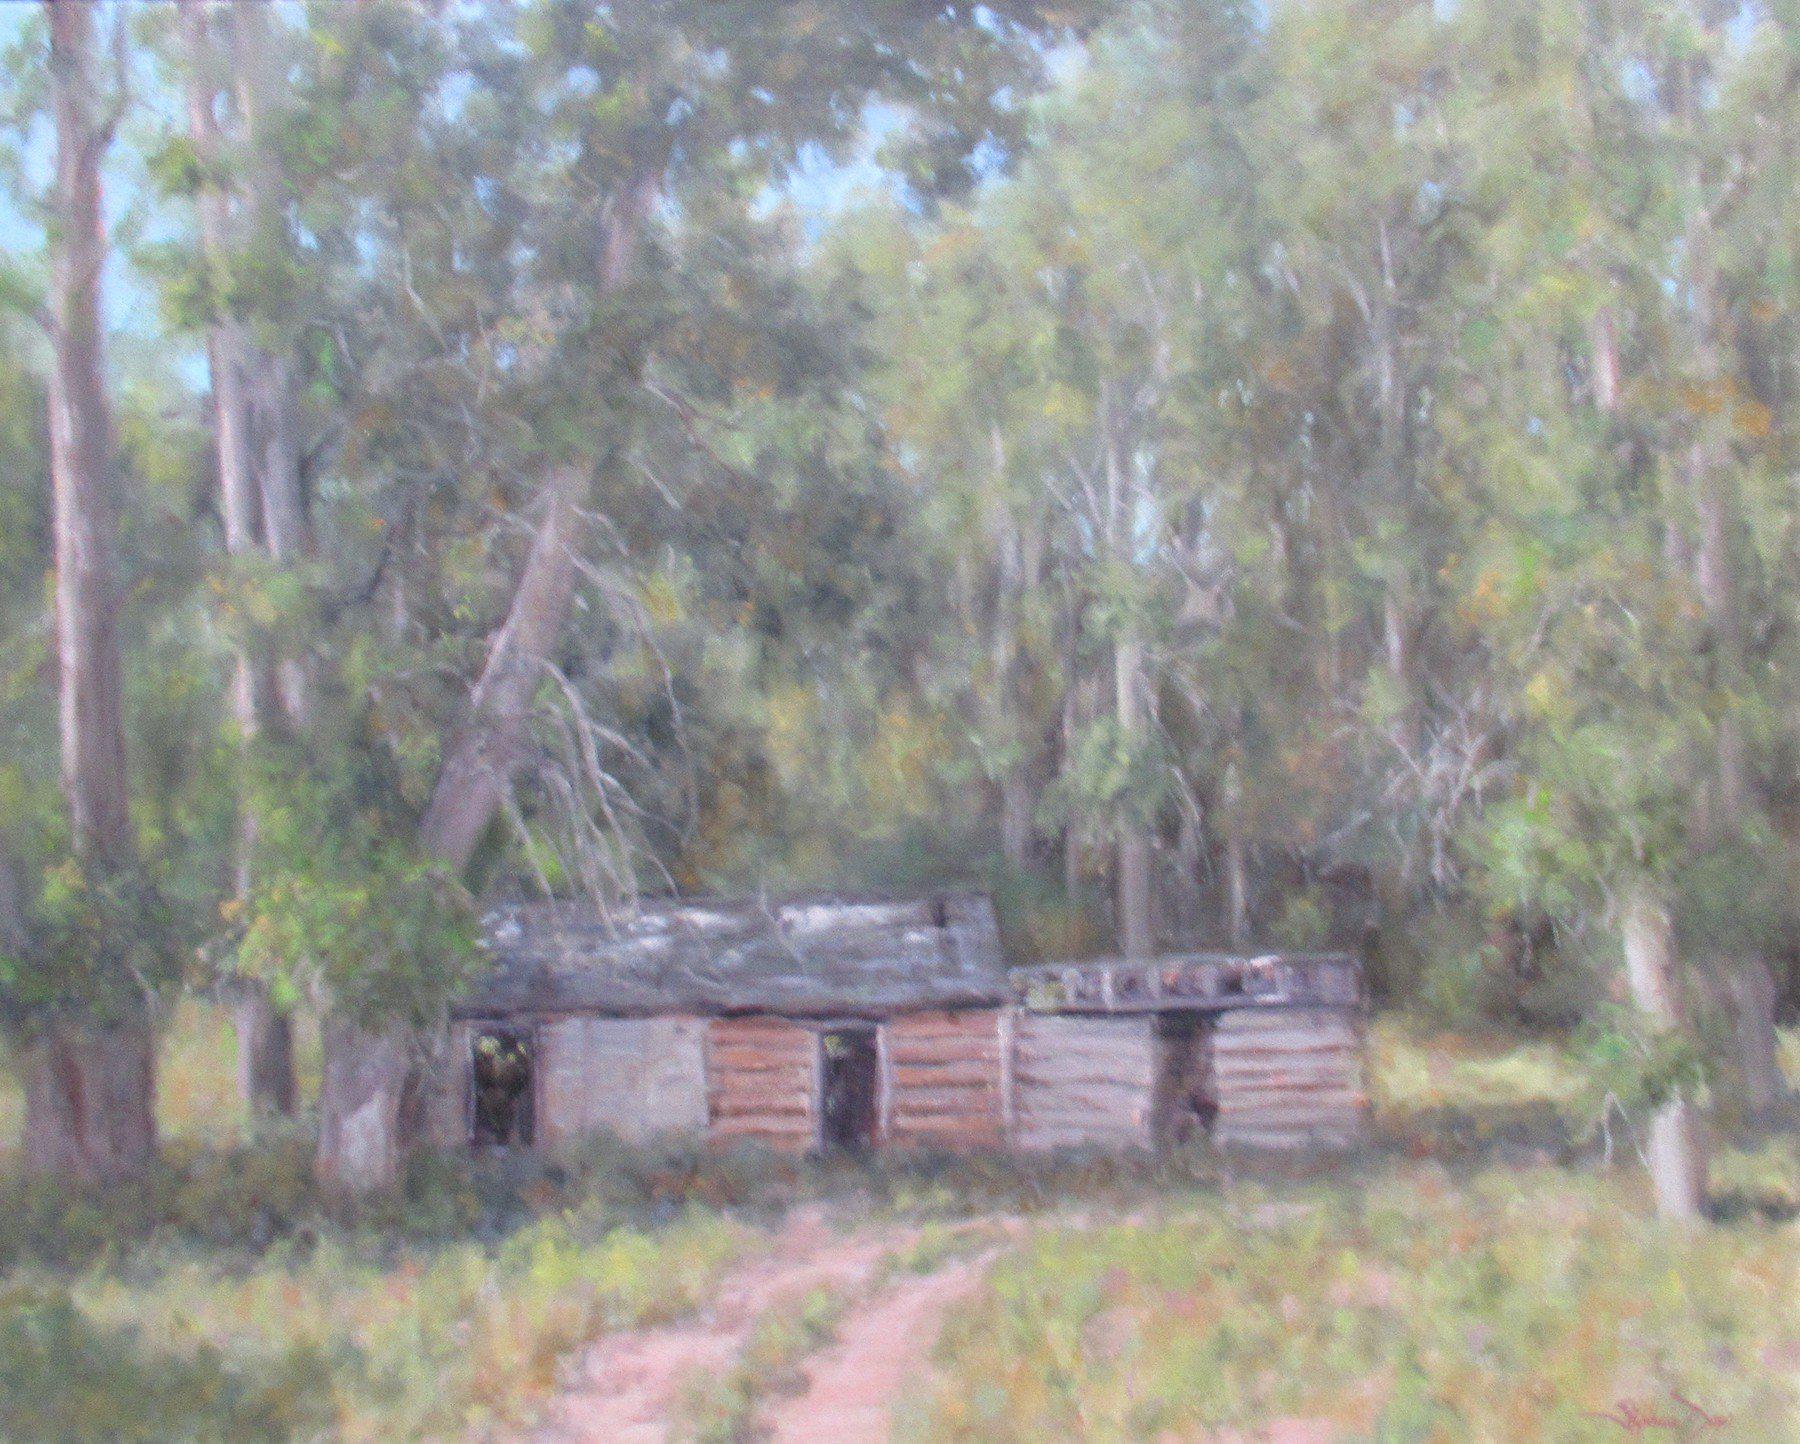 In the Summer Cottonwoods-Painting-Stephen Day-Sorrel Sky Gallery